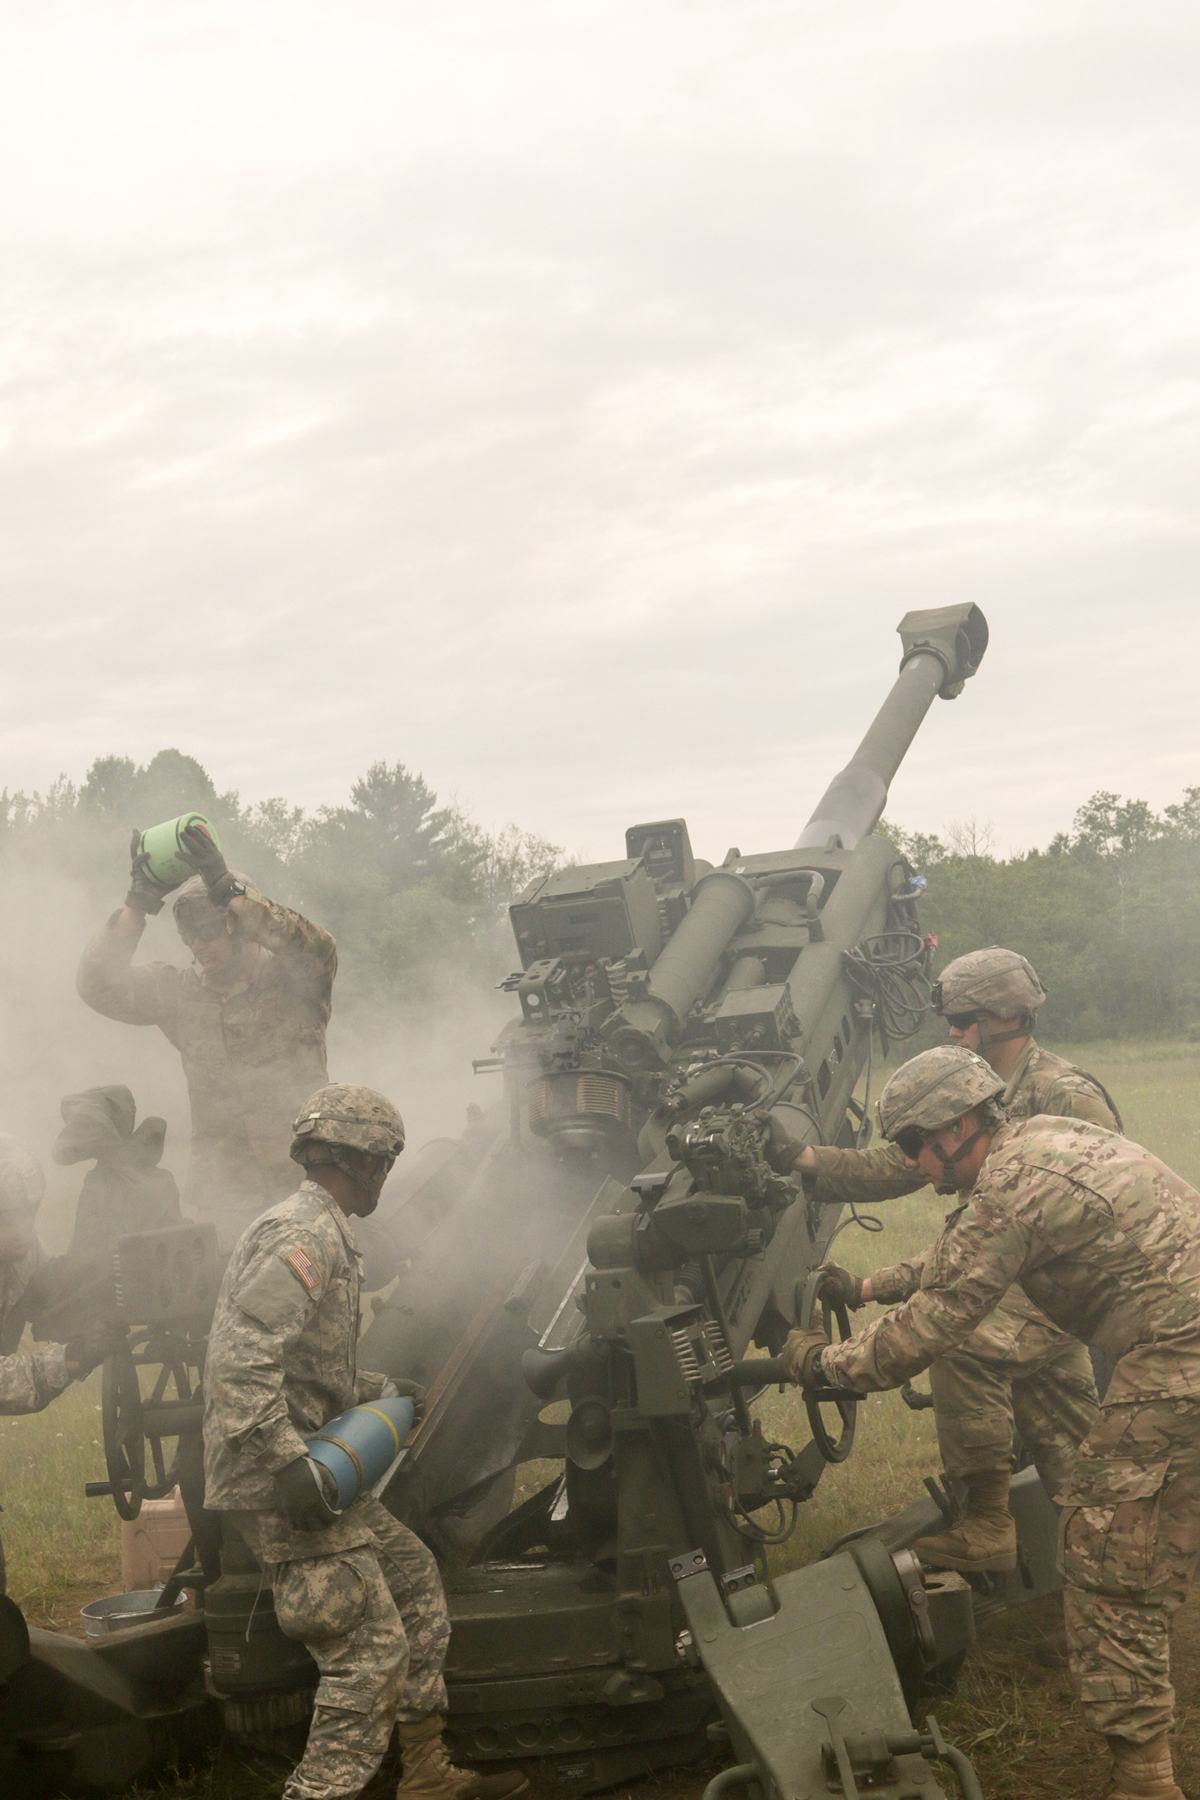 Soldiers load and fire cannon.